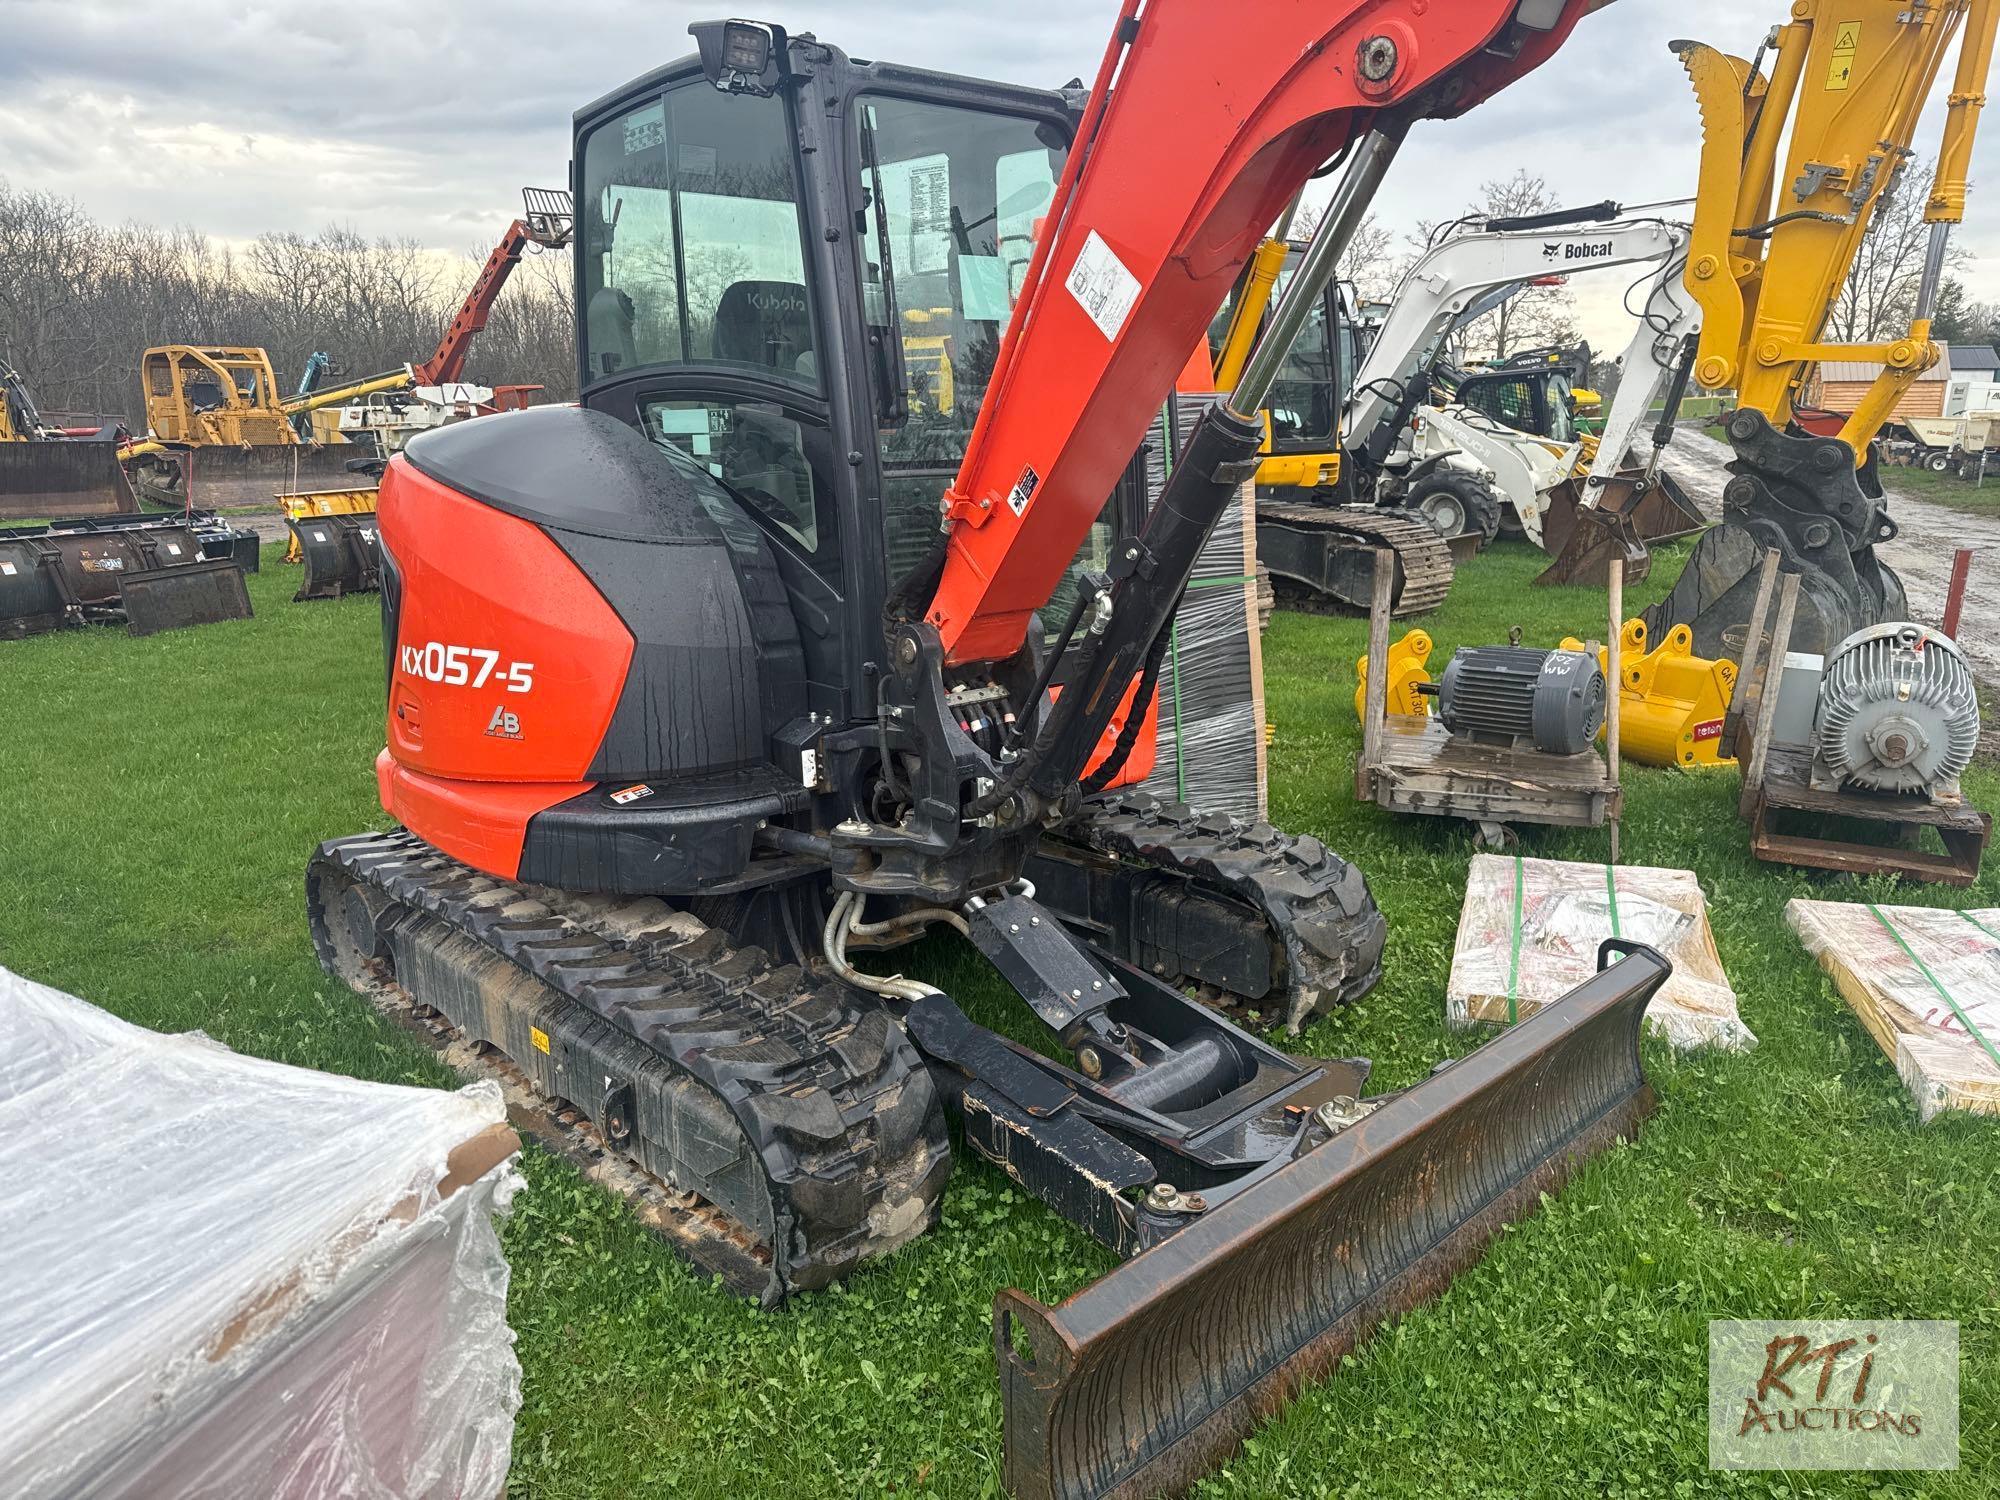 Kubota KX057-5 excavator, cab, angle blade, 36in digging bucket, 268 hrs, excellent